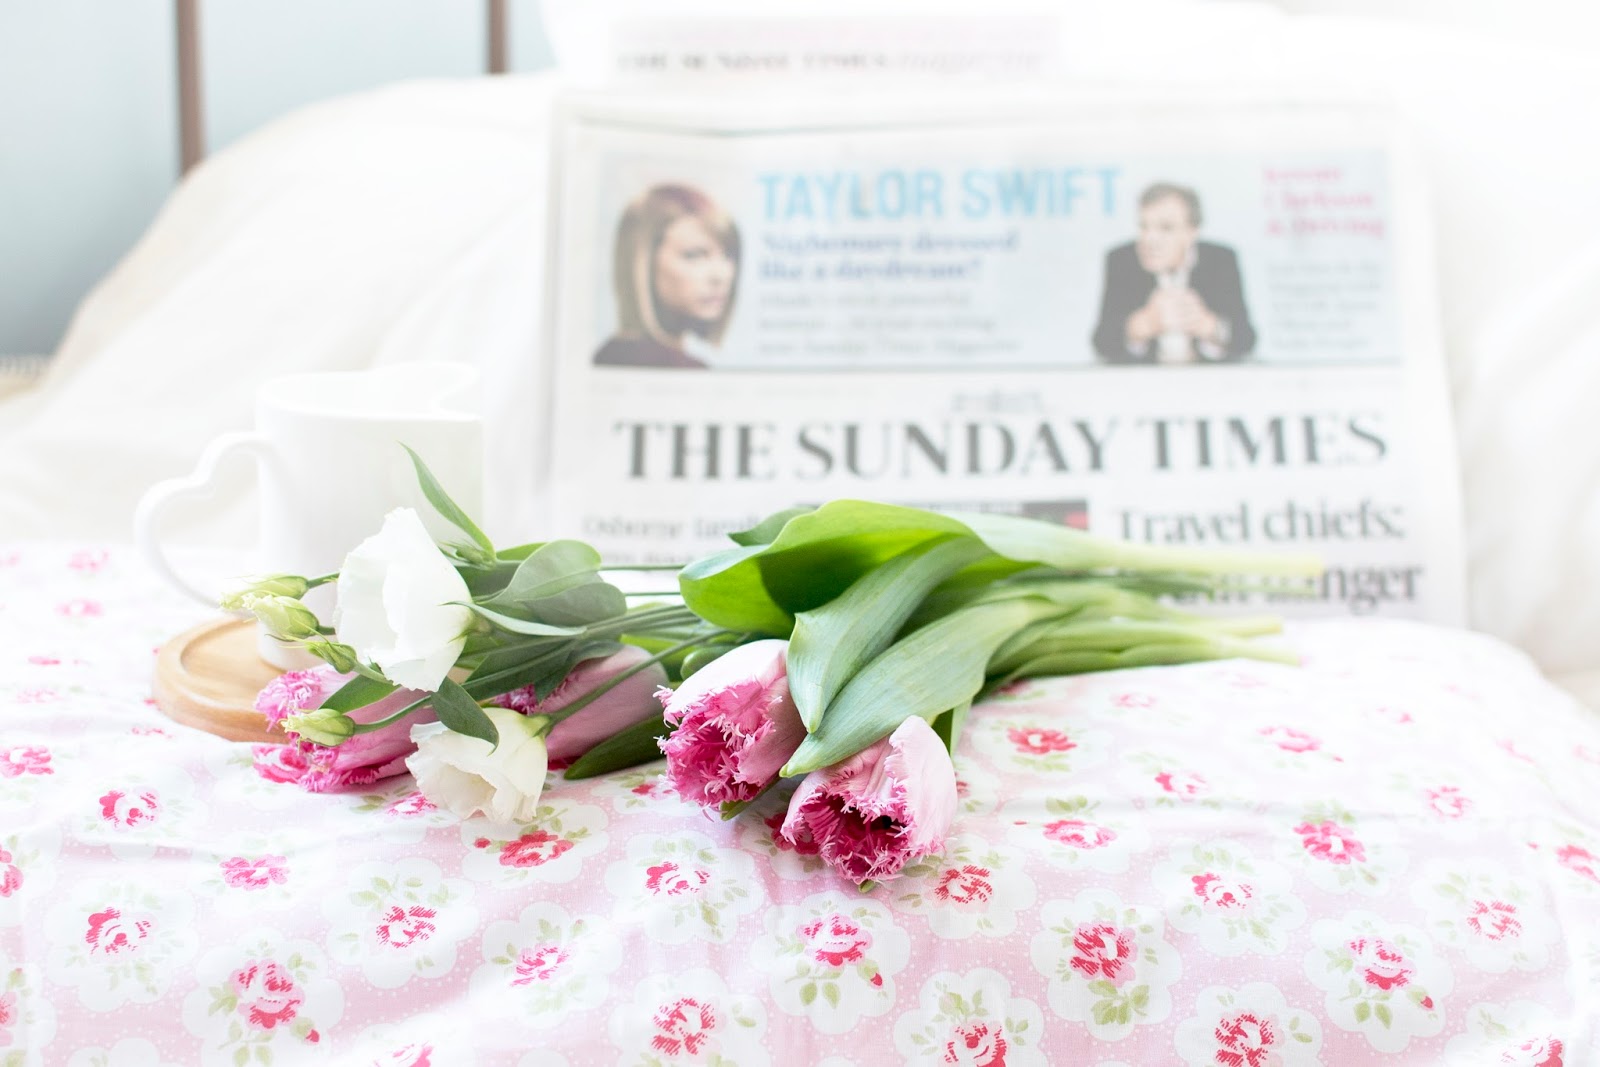 I’M STAYING IN BED: THE SUNDAY TIMES MAGAZINE